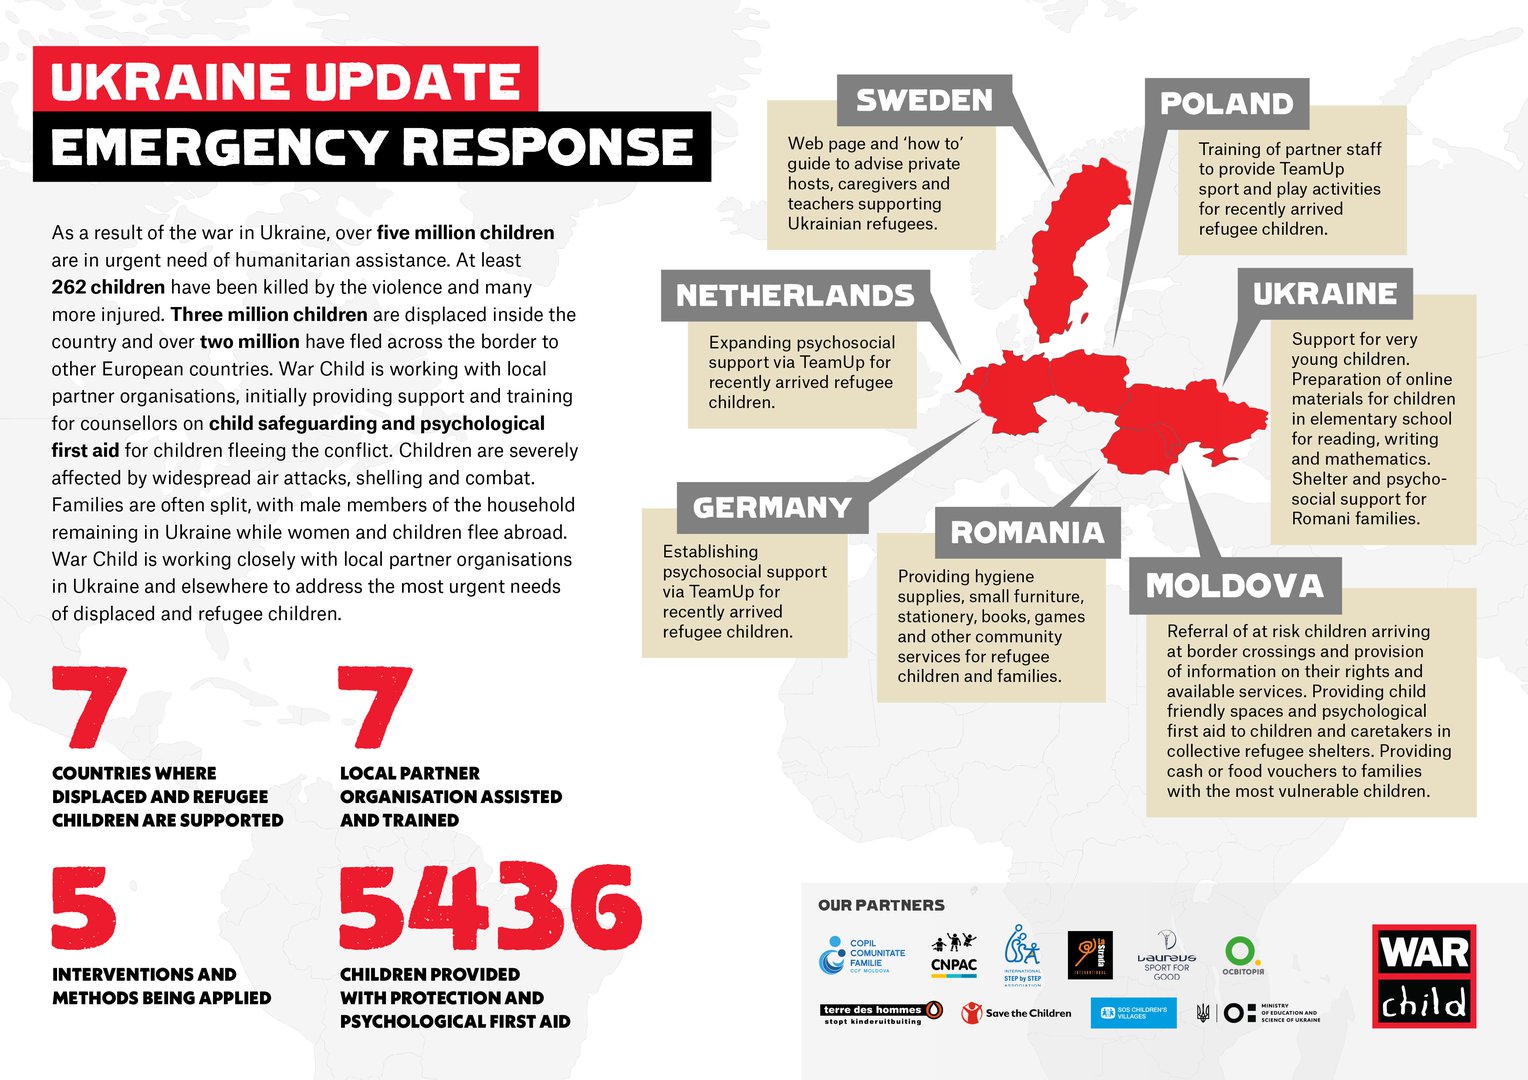 Infographic of War Child's Ukraine Emergency Response Update with key figures and countries